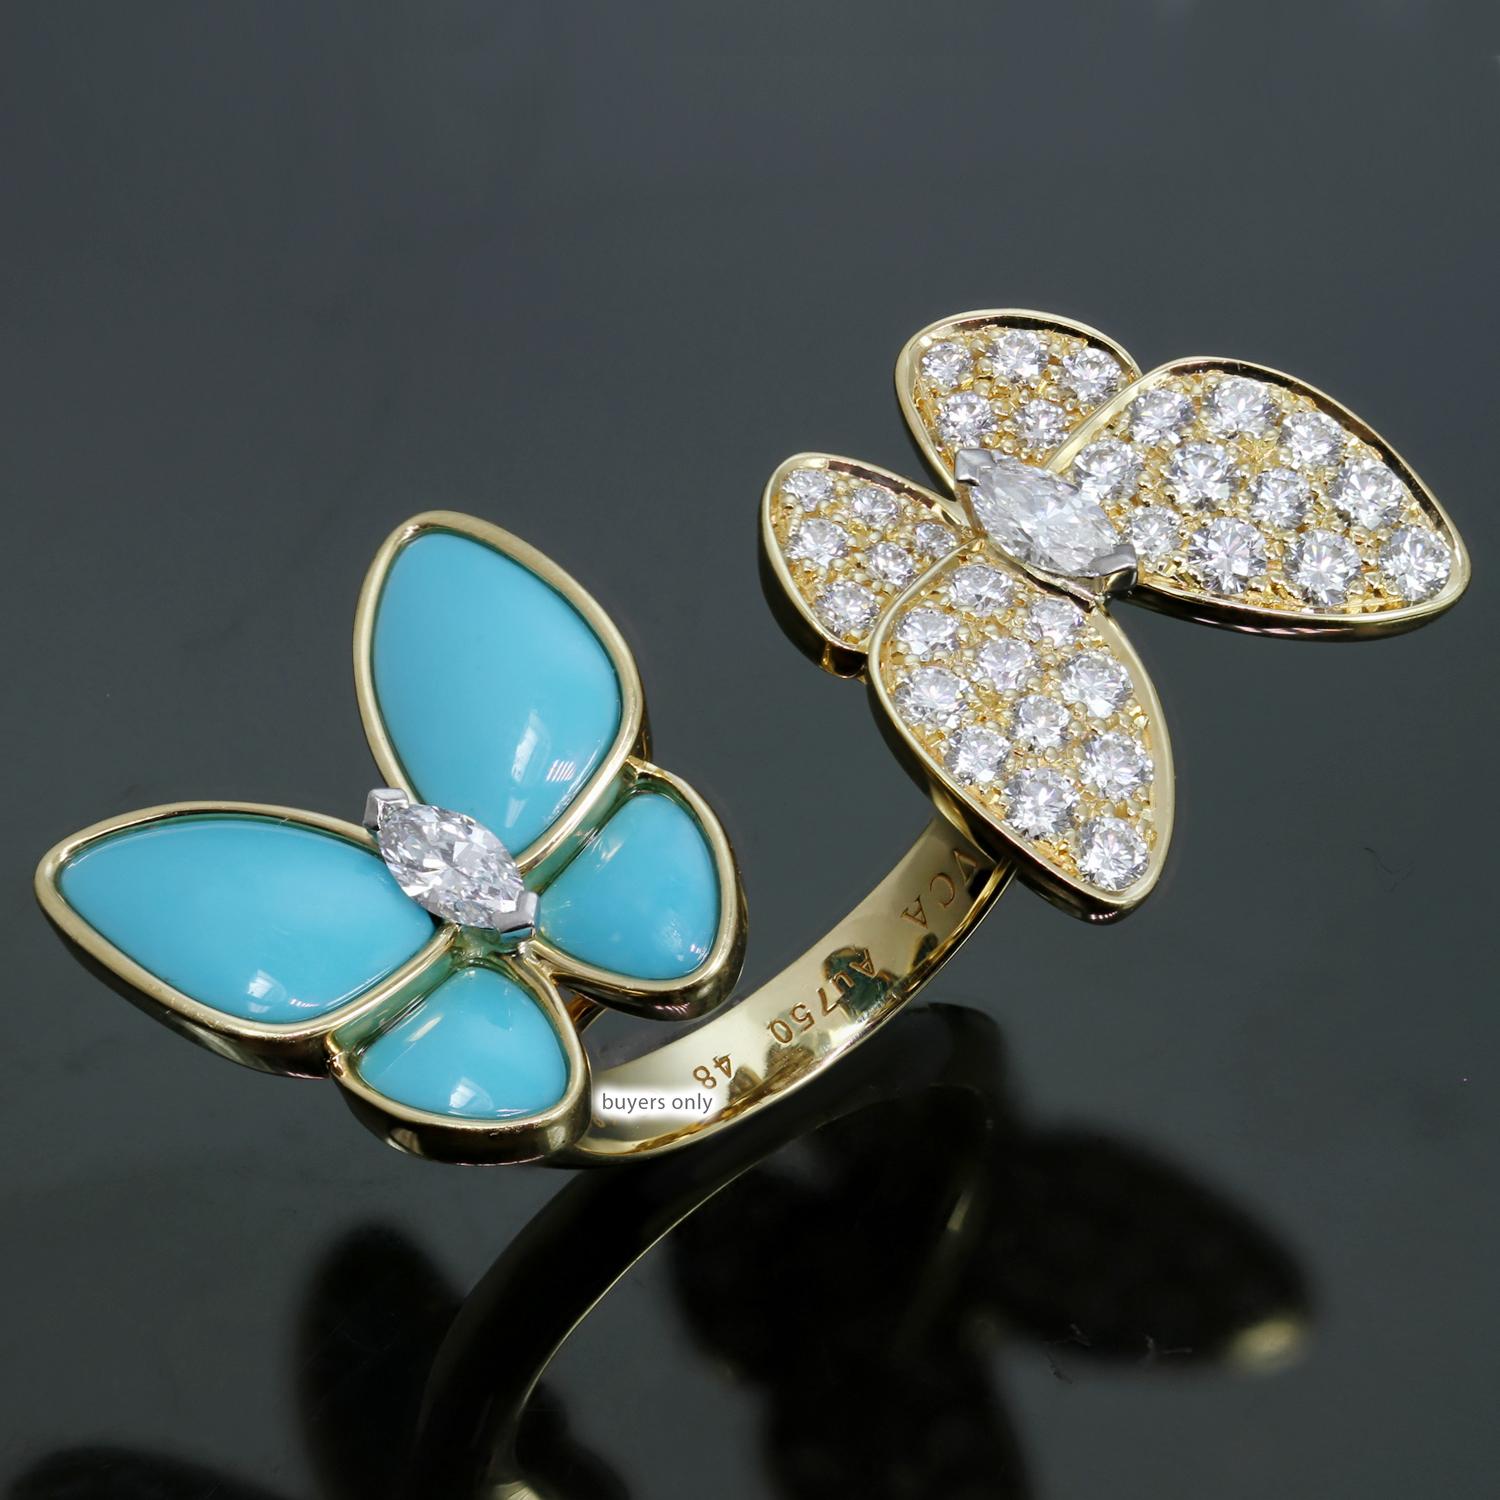 This dazzling Between the Finger ring from Van Cleef & Arpel's Two Butterfly collection is made in 18k  yellow gold and features a pair of butterflies fitting perfectly between two fingers in a striking contrast of 36 D-E-F VVS1-VVS brilliant-cut